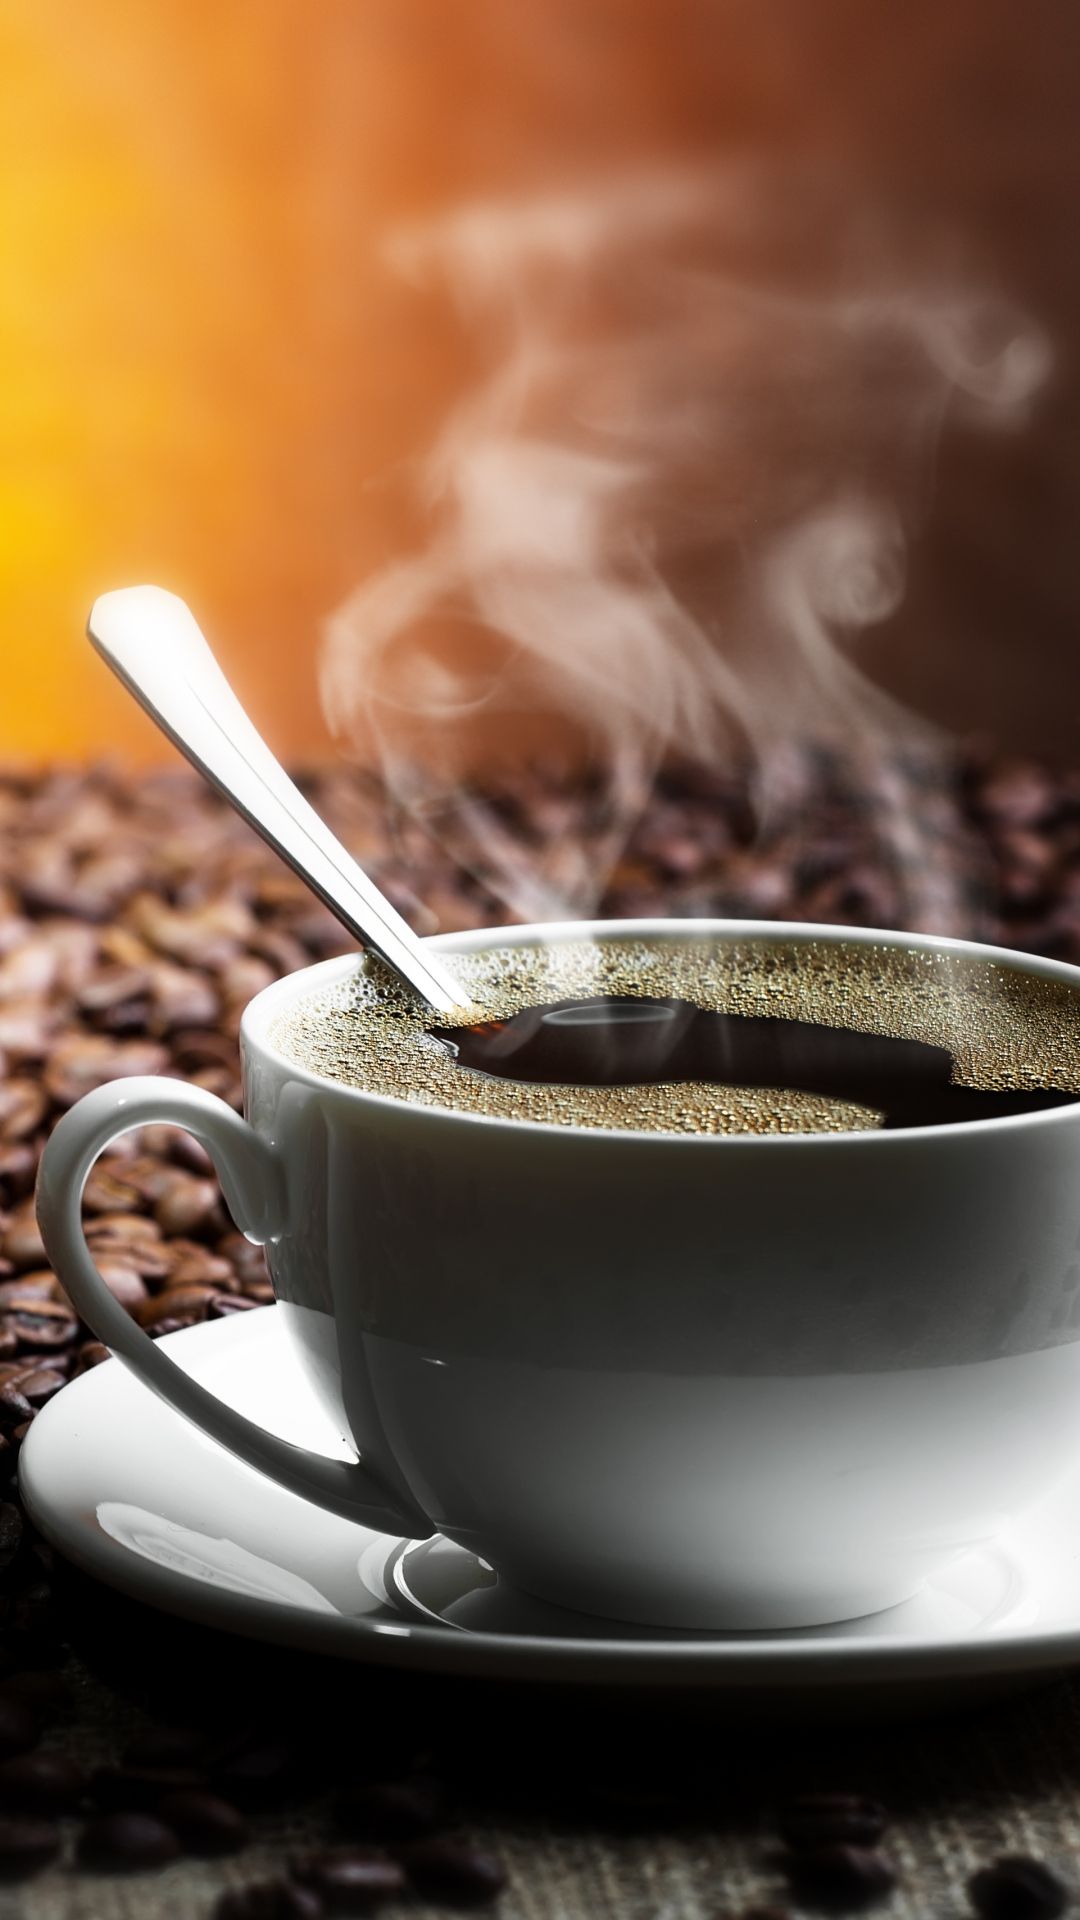 Hot Coffee Wallpaper Free Hot Coffee Background